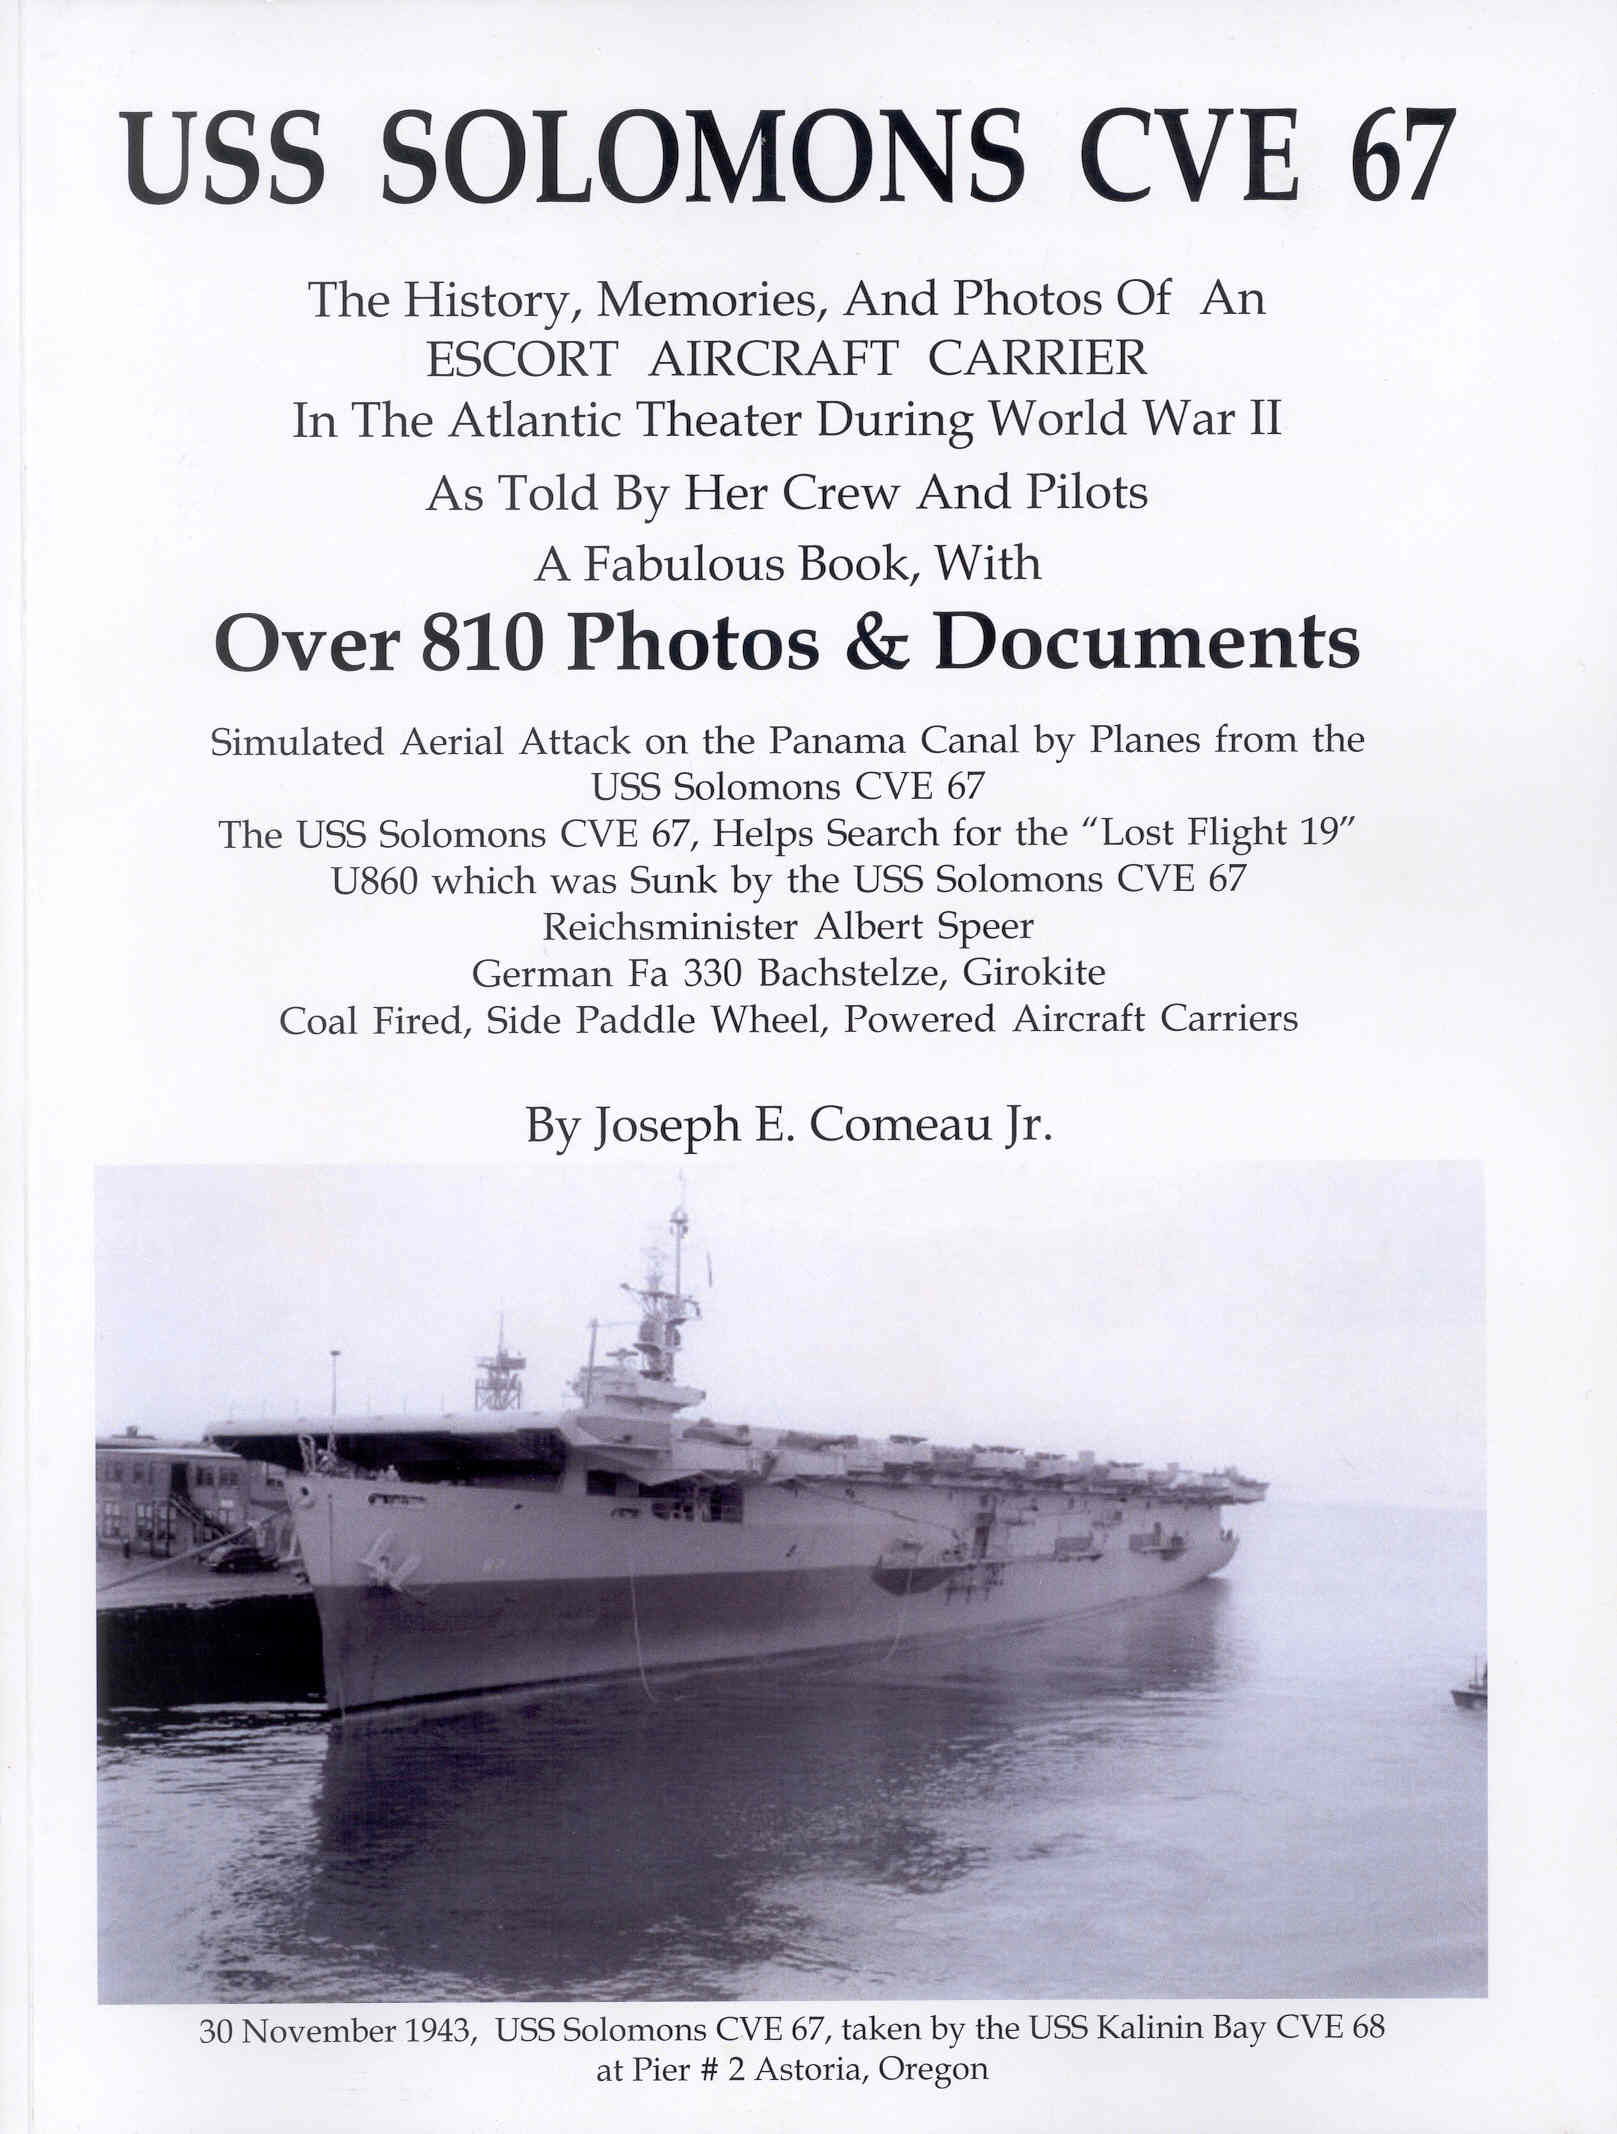 front cover.jpg - 190kb